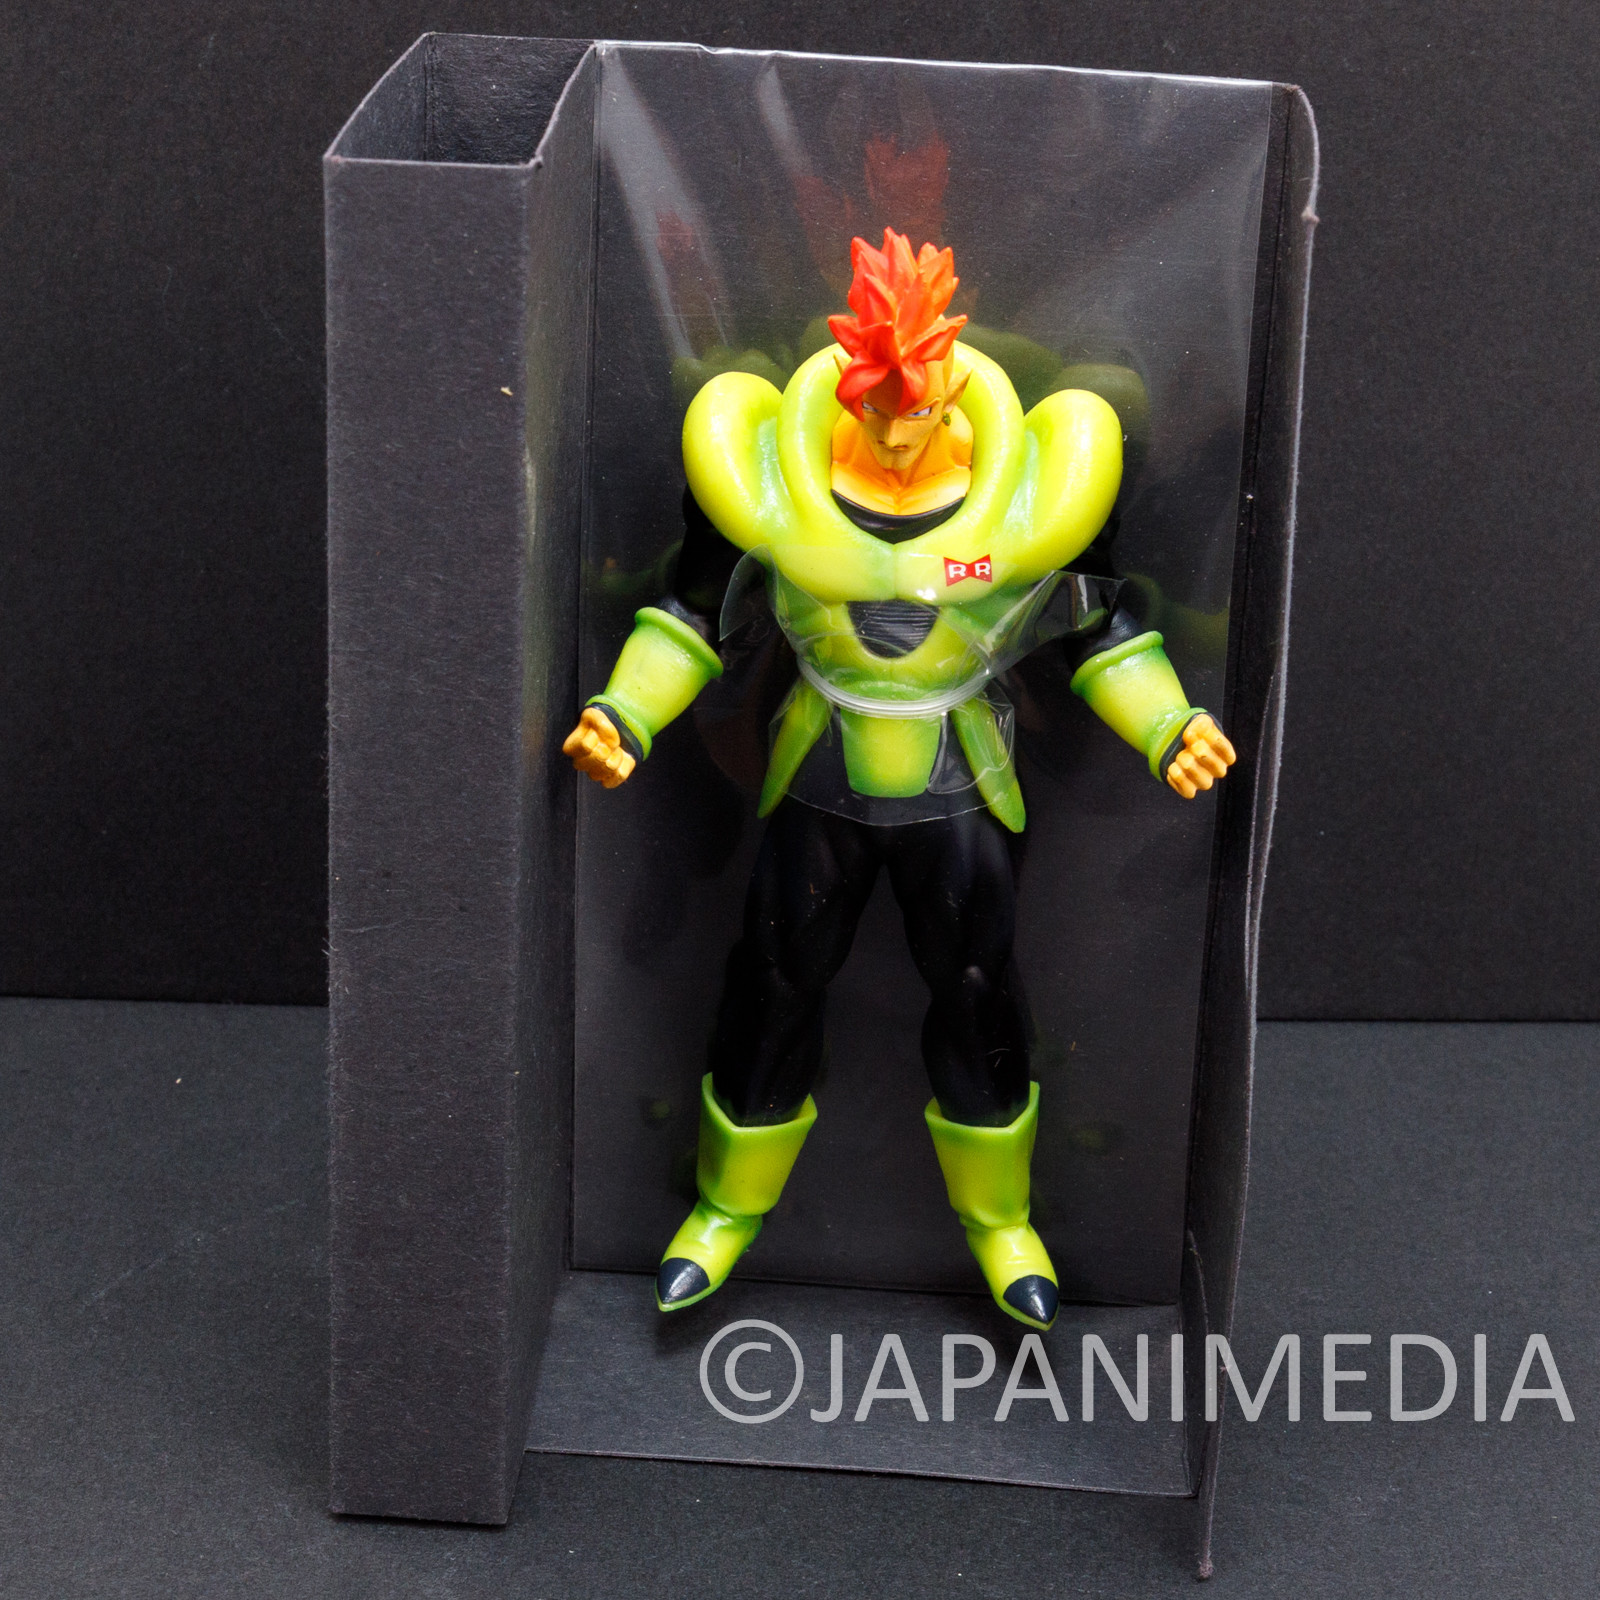 Dragon Ball Z Android 16 HSCF Figure high spec coloring JAPAN ANIME